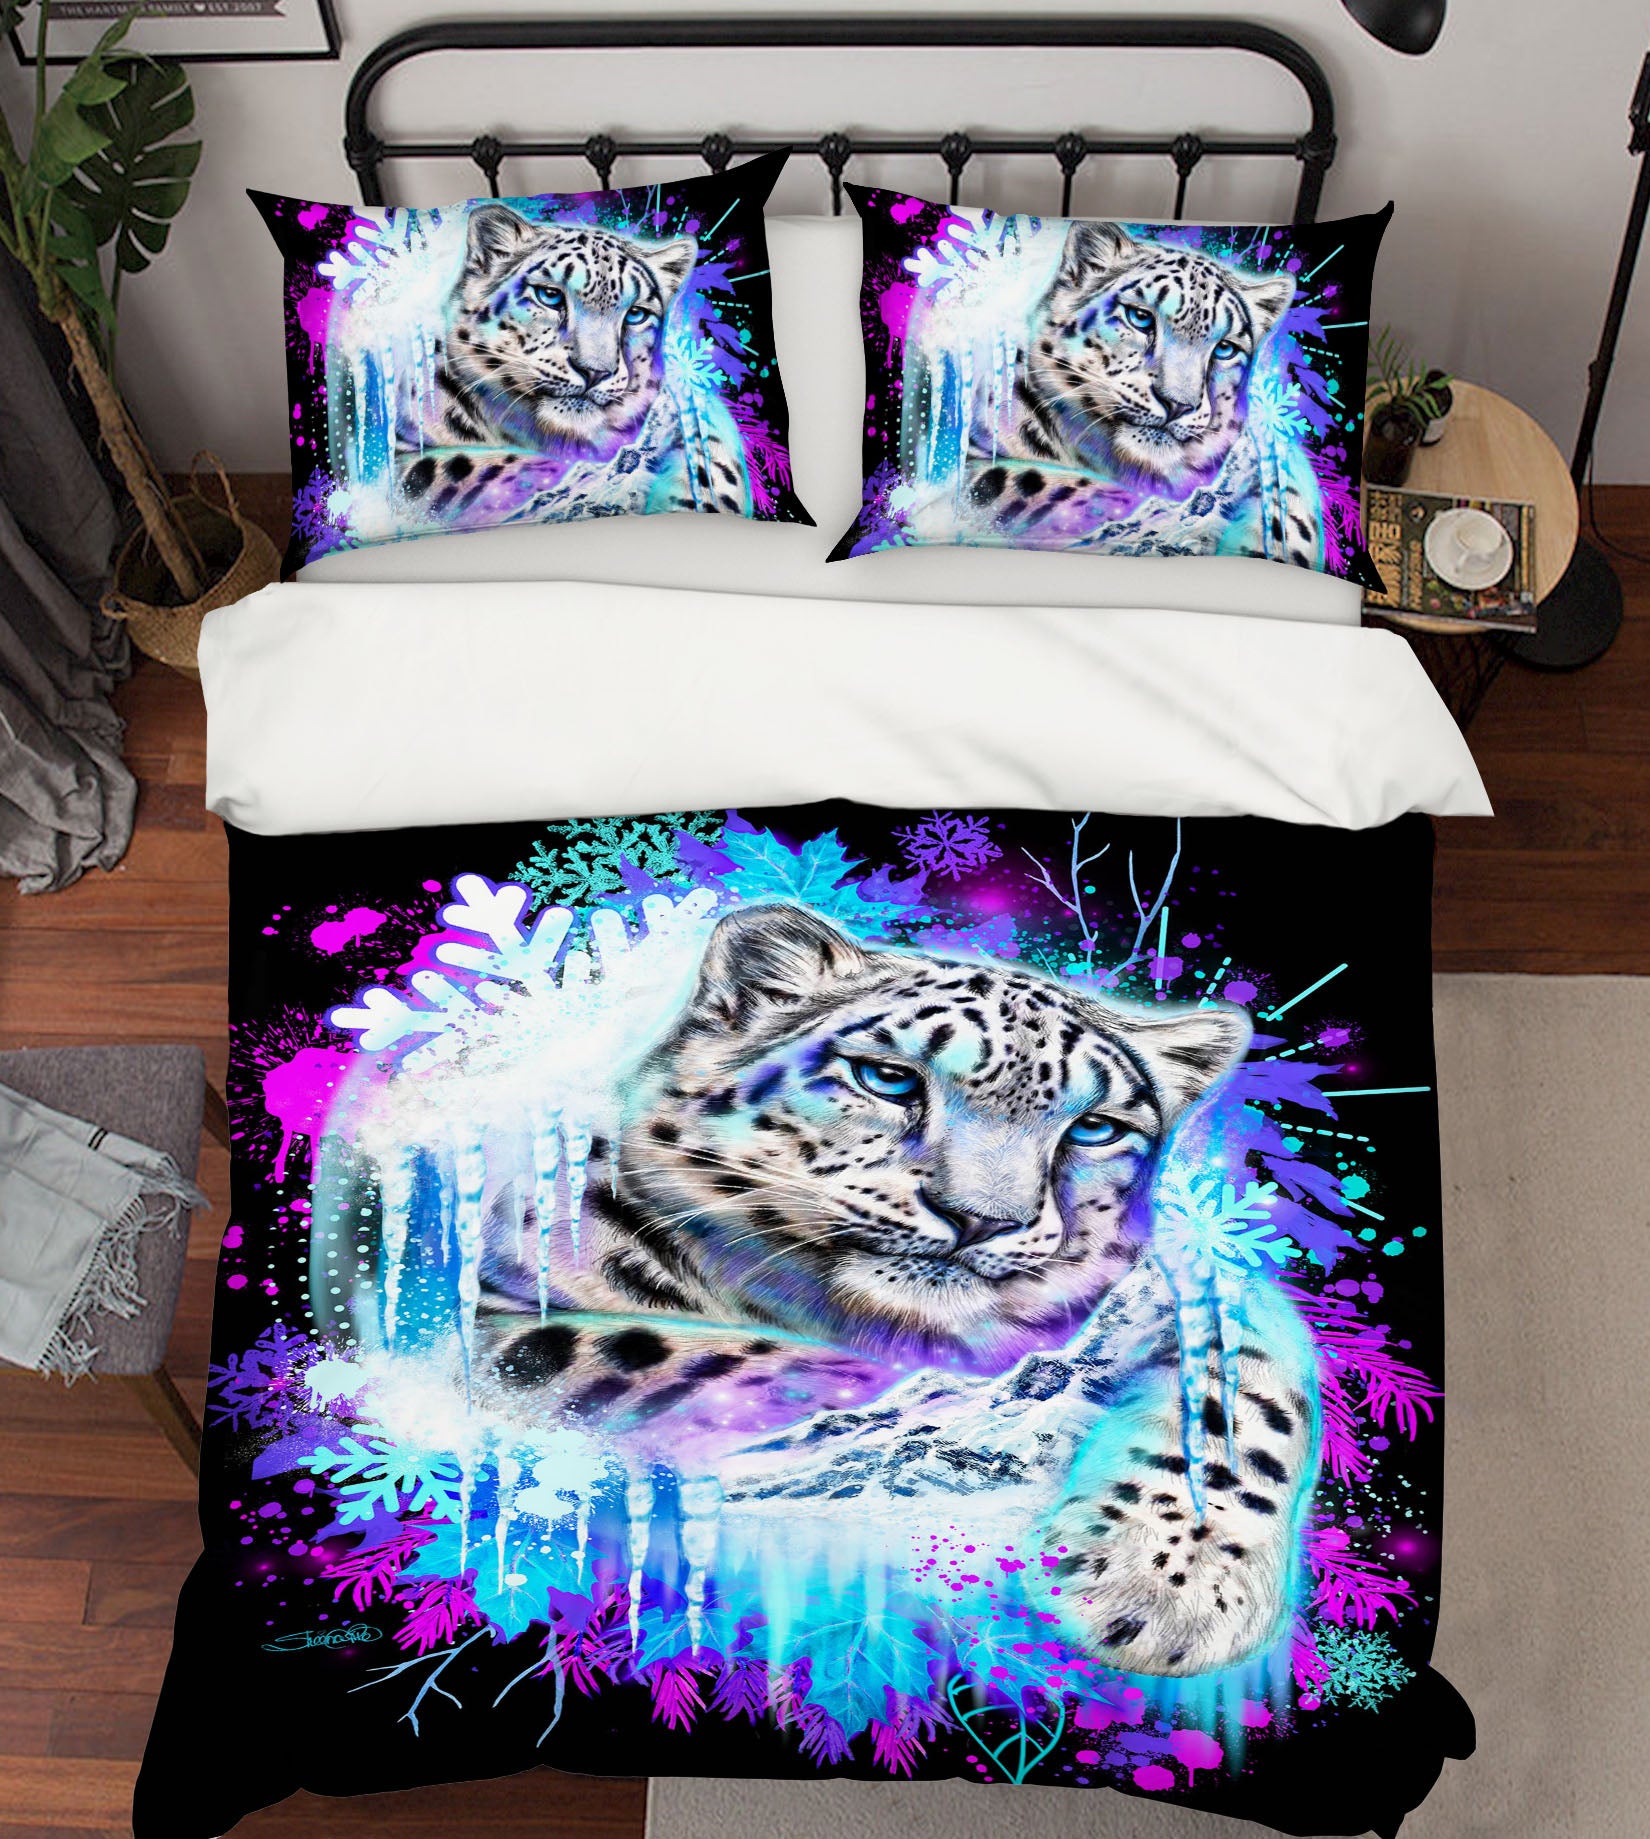 3D Snowflake Leopard 8608 Sheena Pike Bedding Bed Pillowcases Quilt Cover Duvet Cover